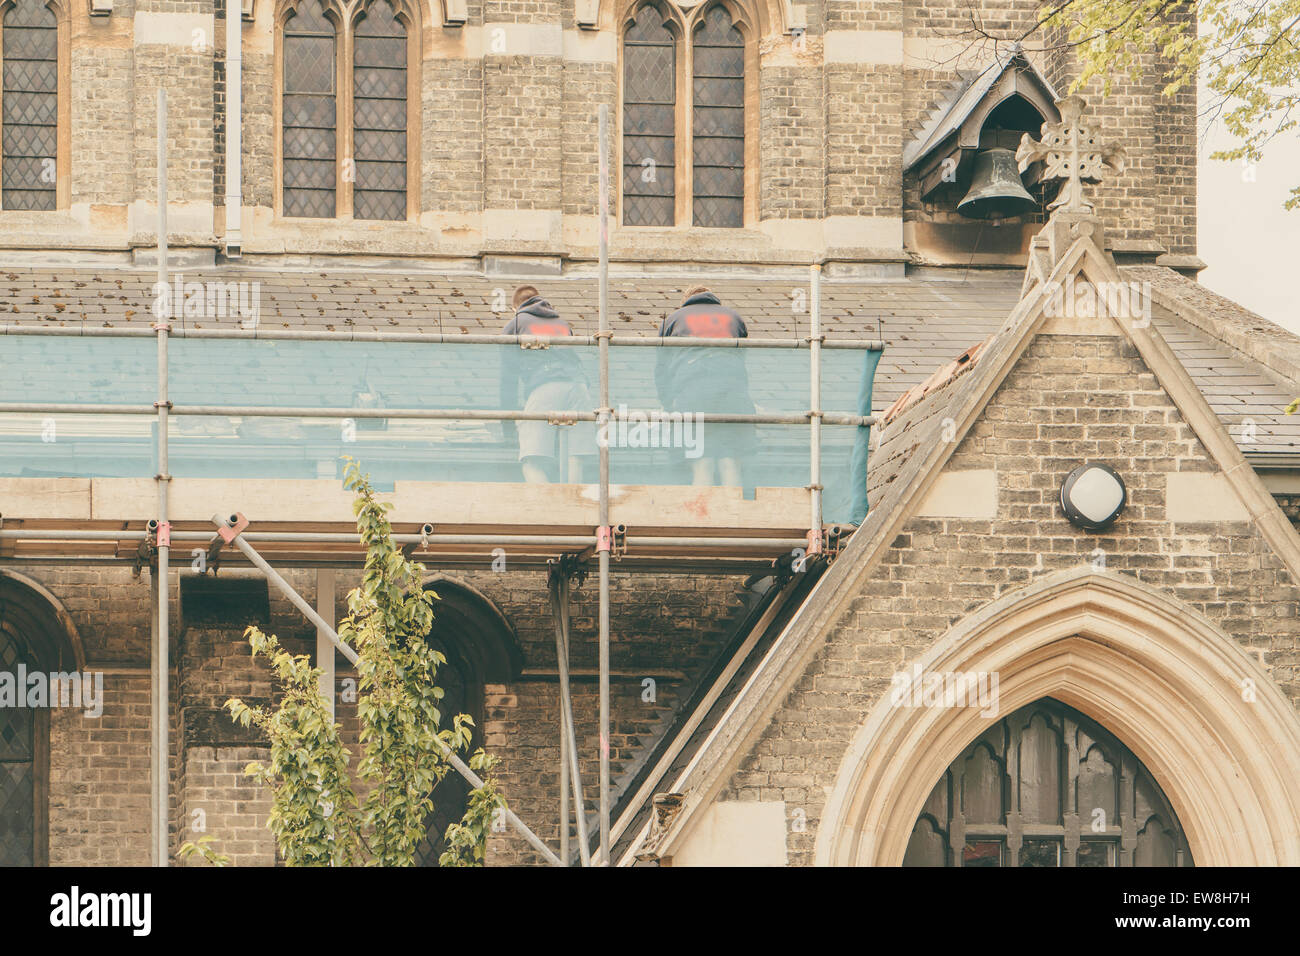 Builders repairing roof of a church standing on scaffolding, church in background Stock Photo